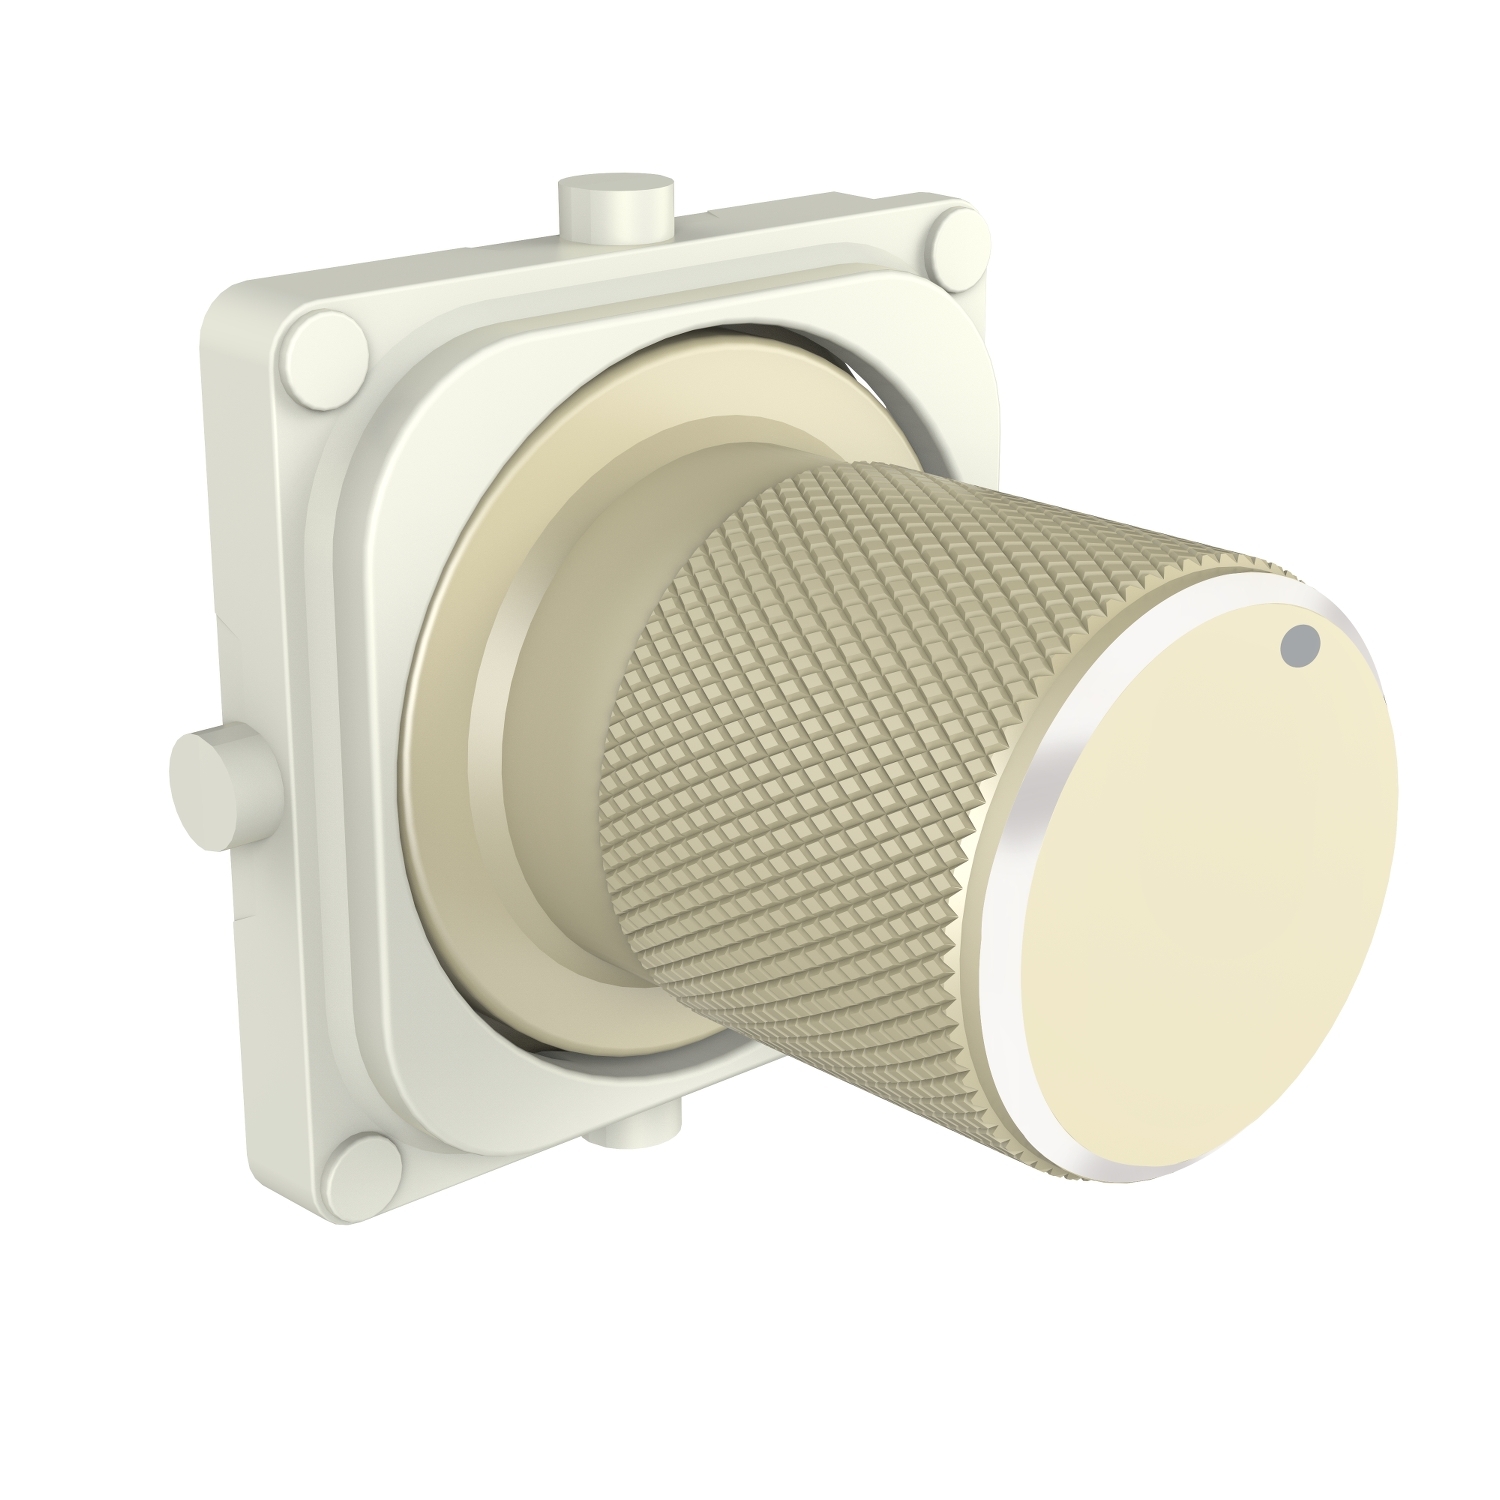 PDL Iconic Styl, knob dimmer for cover frame - Crowne